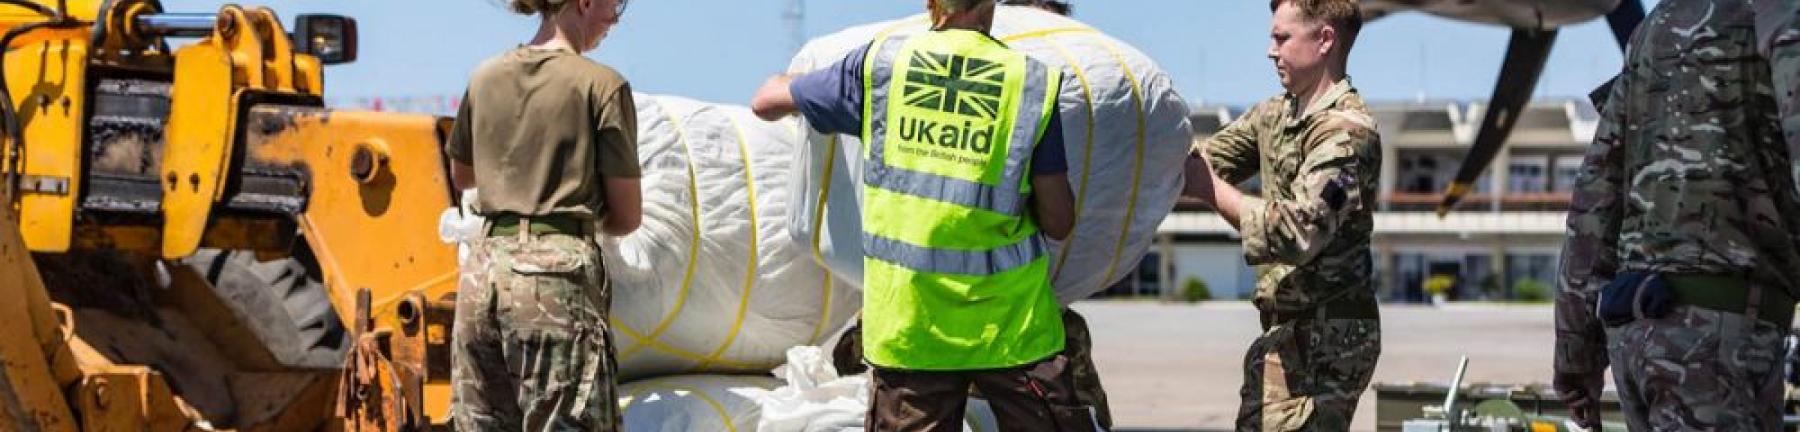 Photo of a person in a UK aid hi-vis vest accompanied by a man and a woman in camouflage clothing loading bundles of humanitarian aid into a plane 